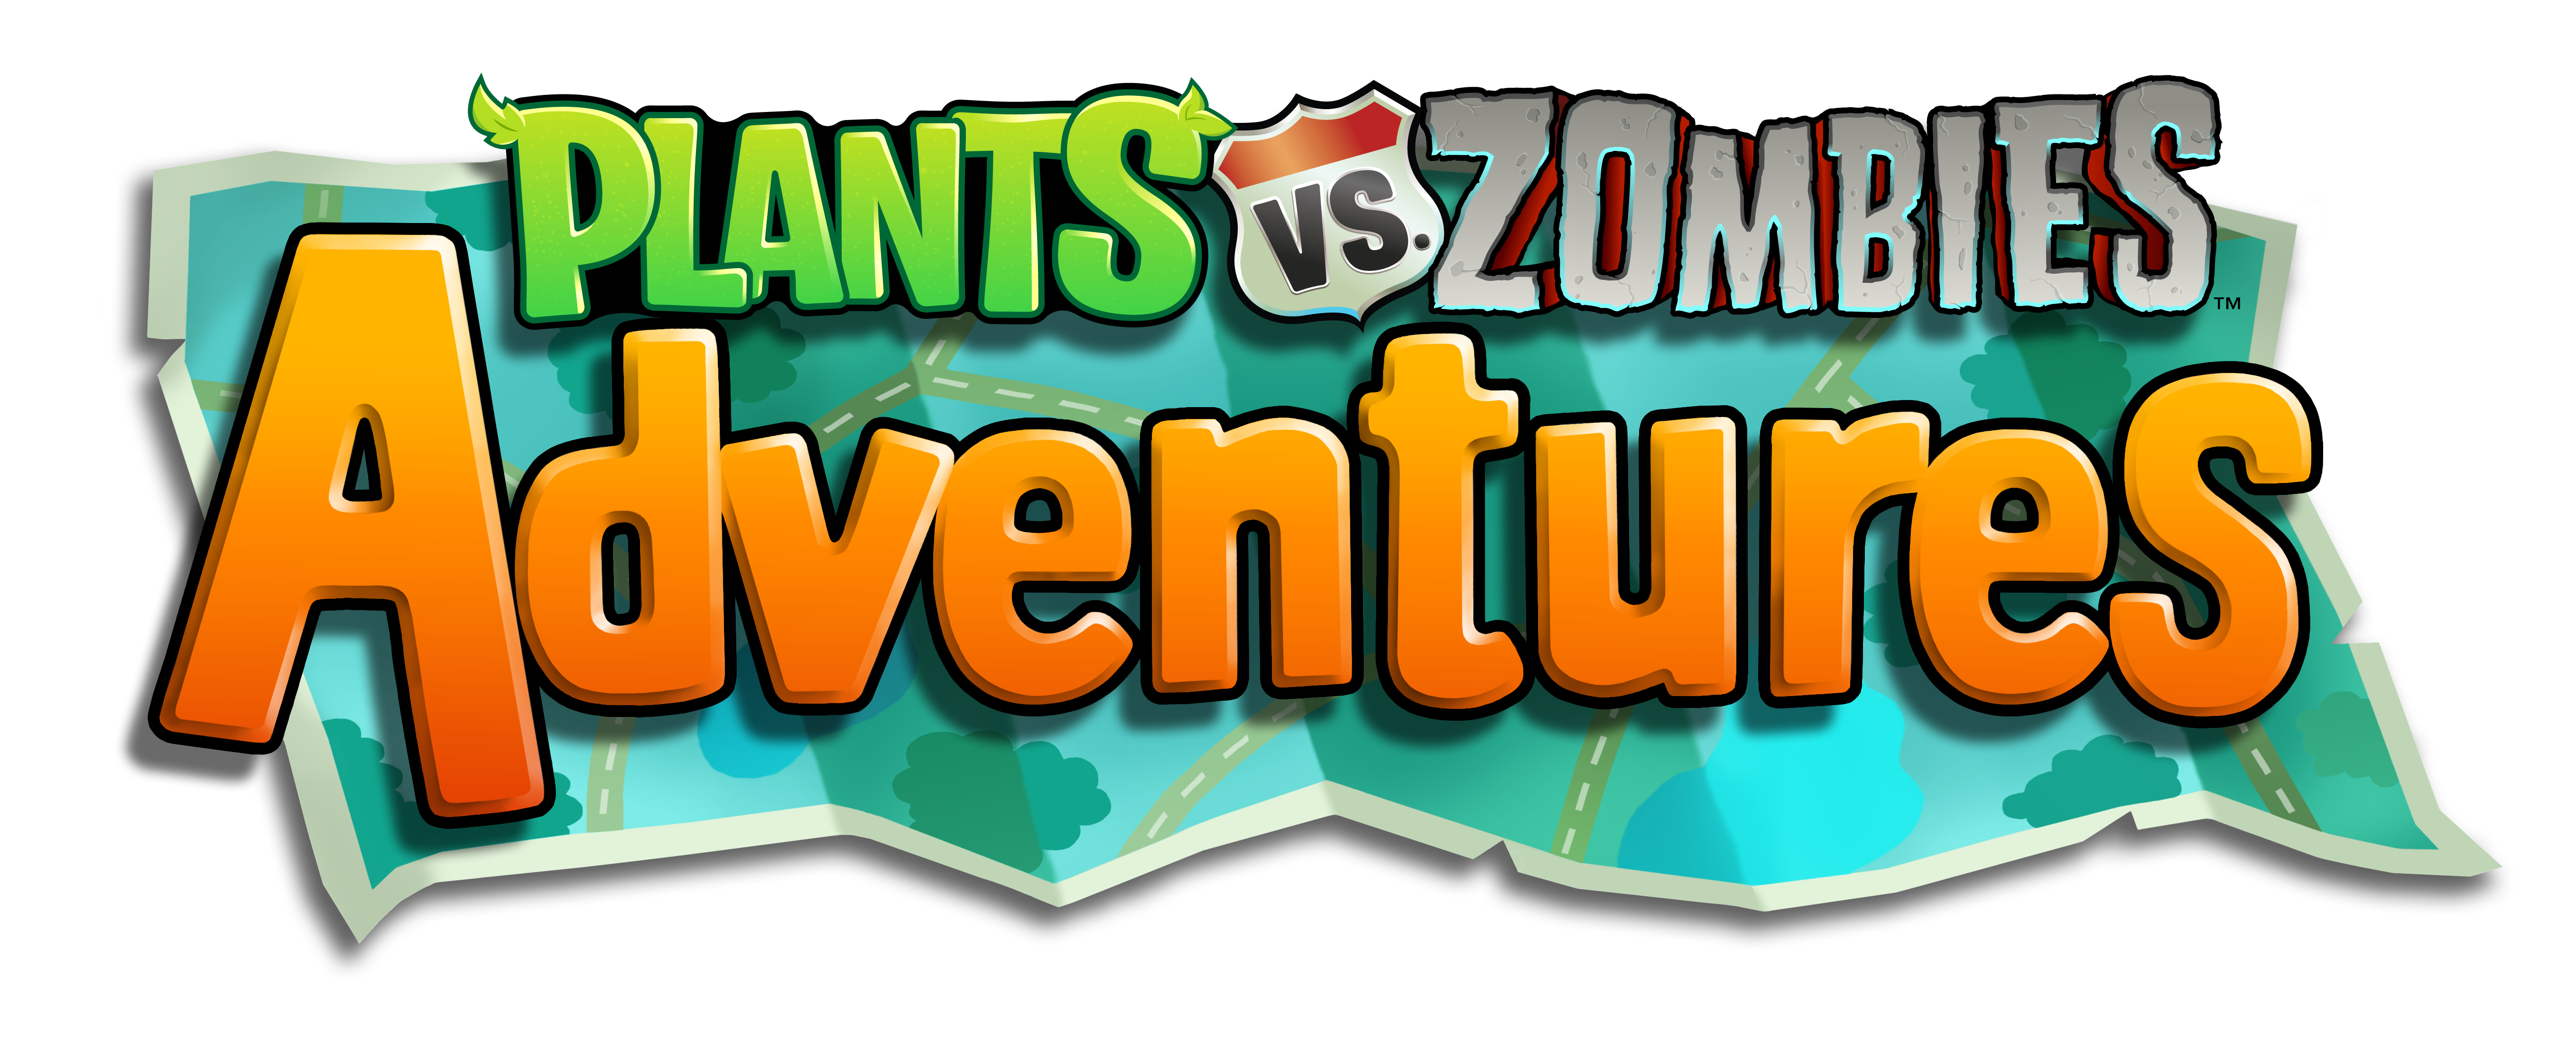 play plants vs zombies adventures without facebook